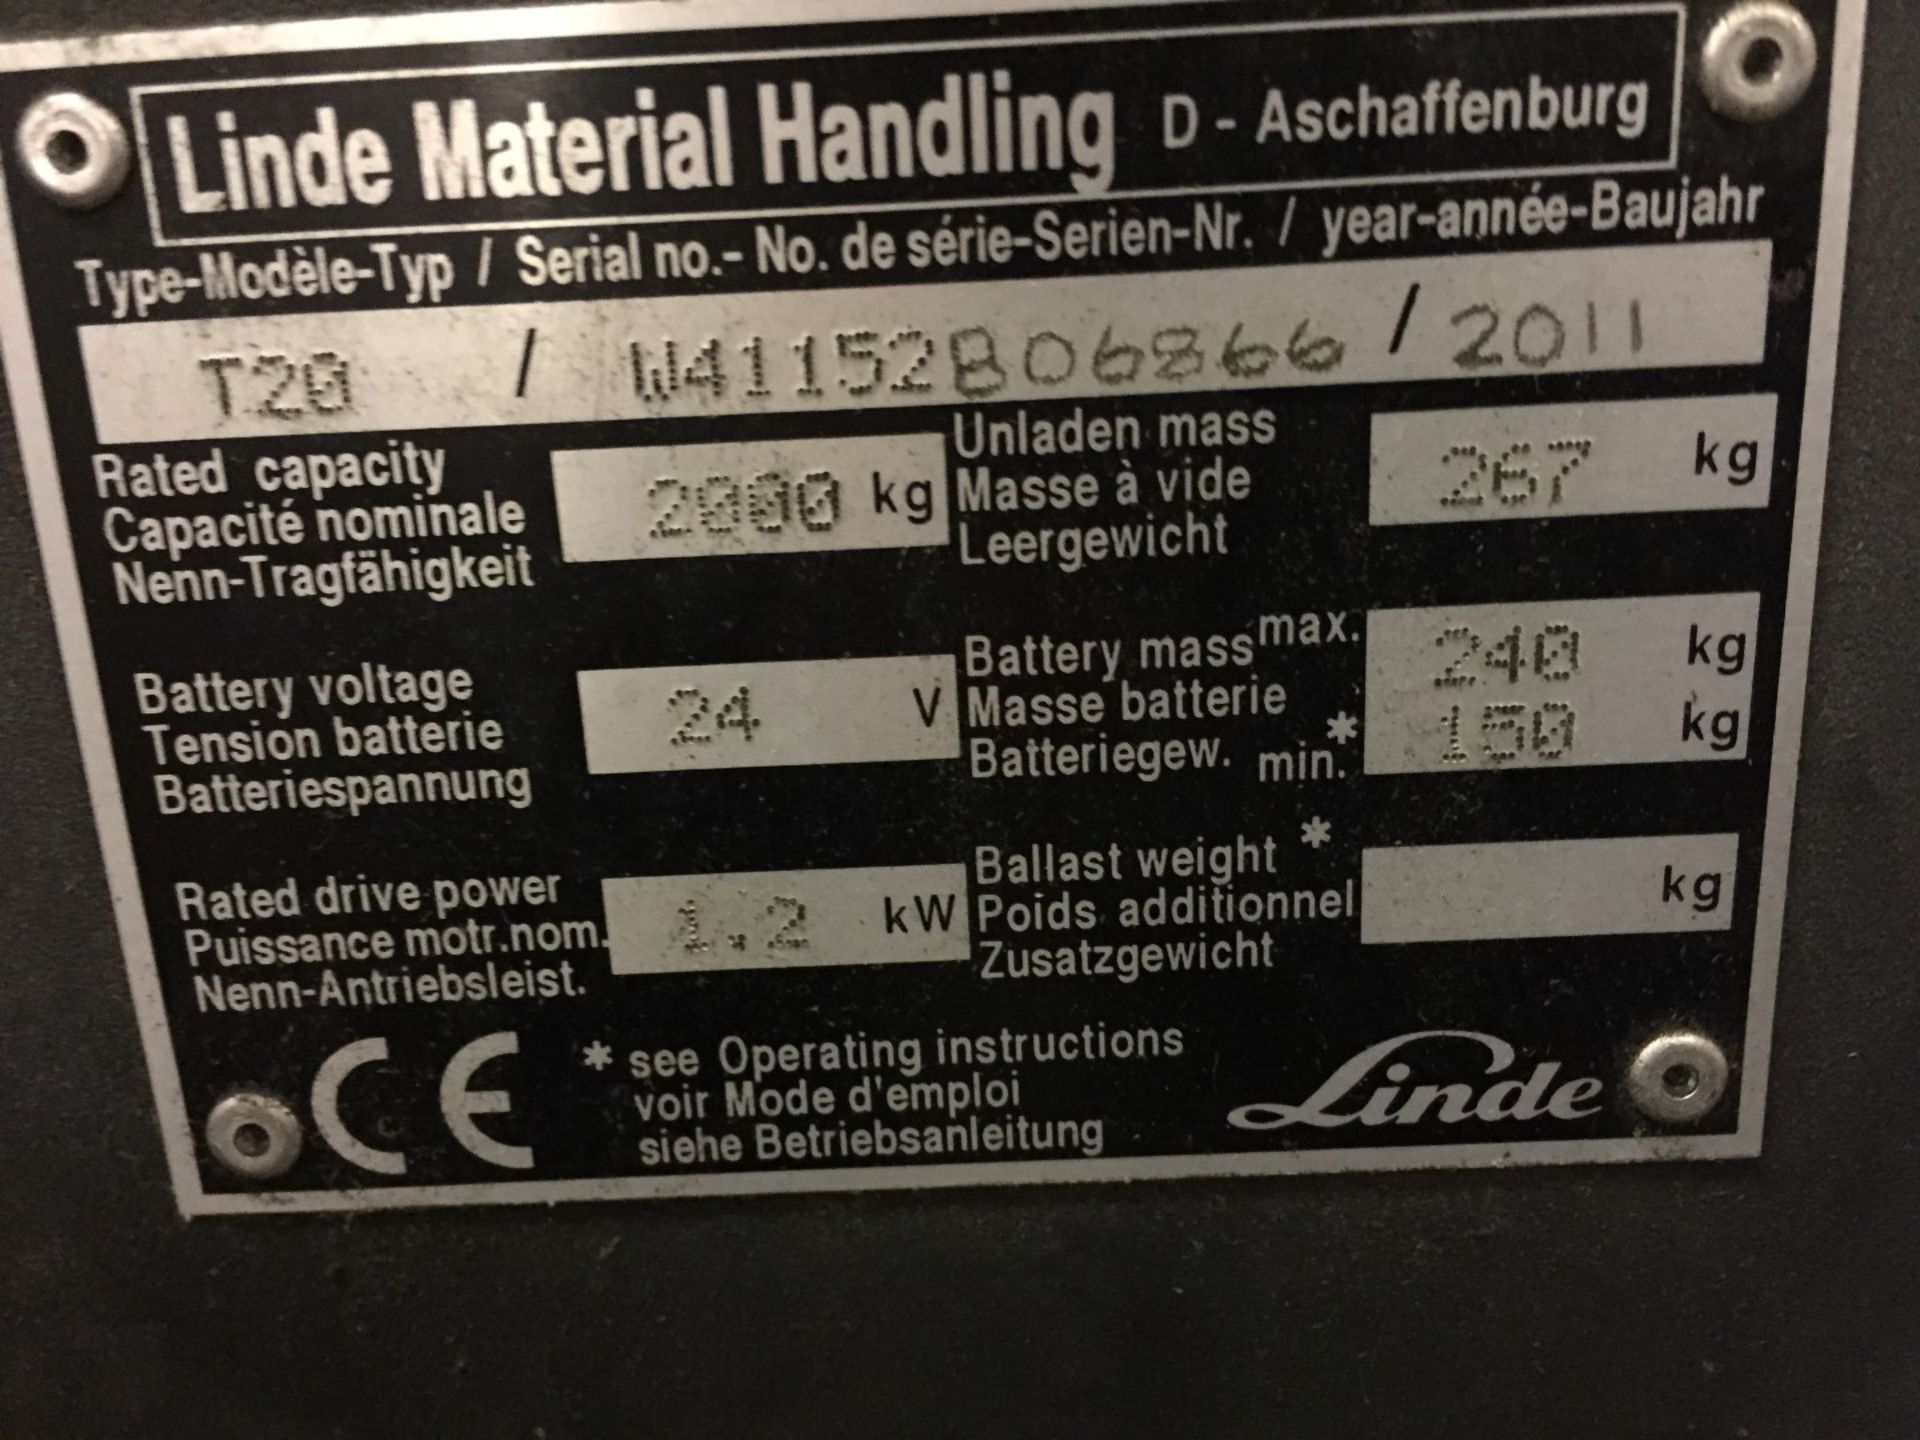 1 x Linde T20 Electric Pallet Truck - Tested and Working - Charger Included - CL007 - Ref: T20/1 - - Image 6 of 12